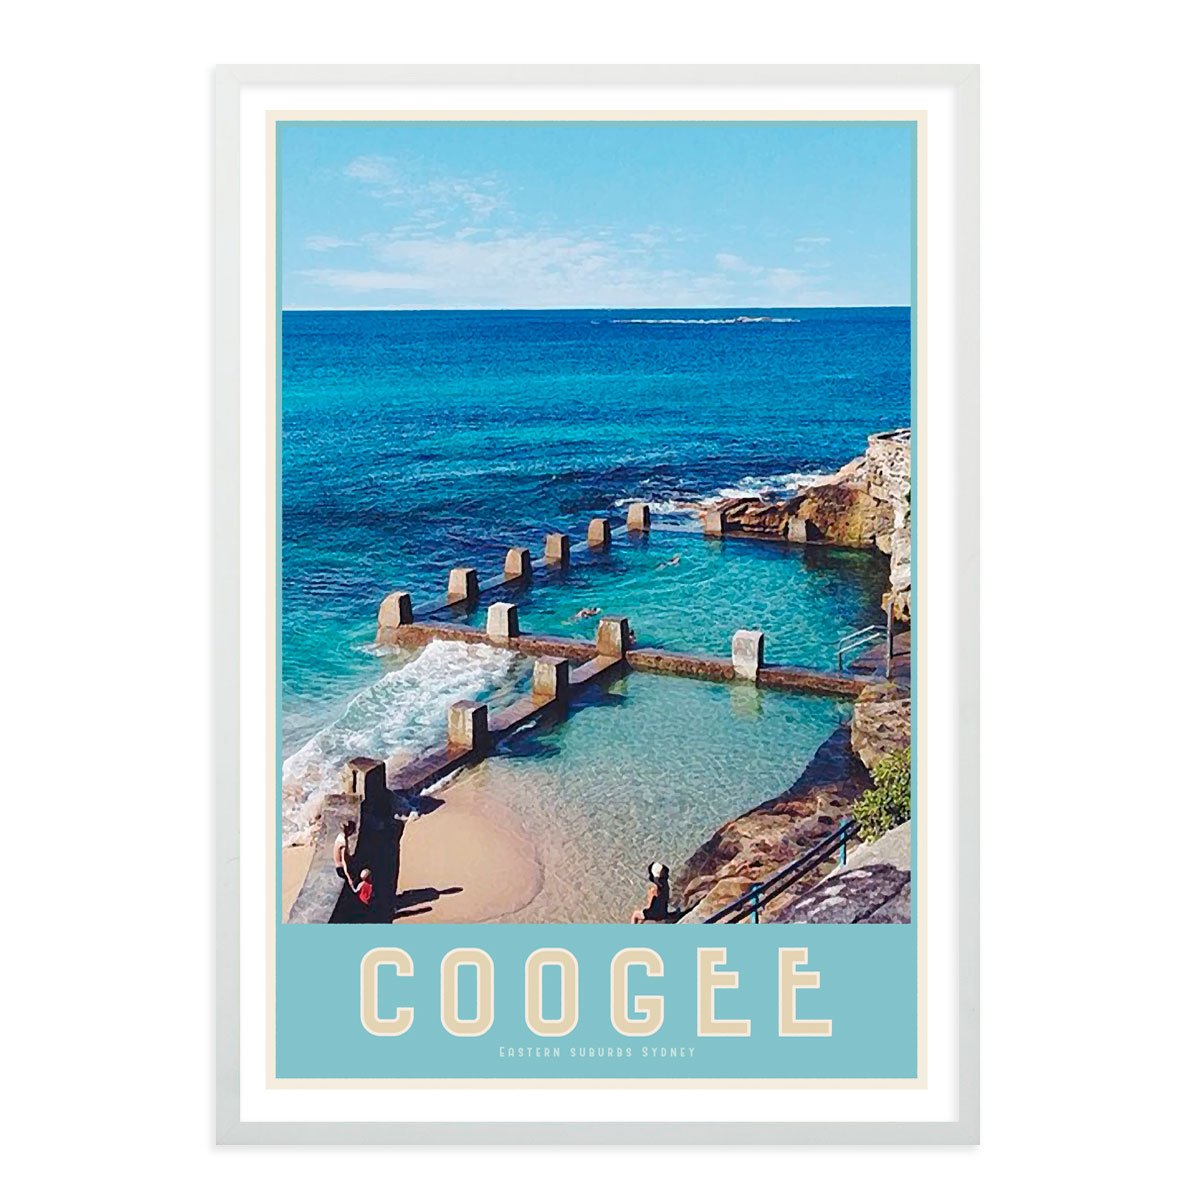 Coogee Pool vintage travel style framed print by places we luv